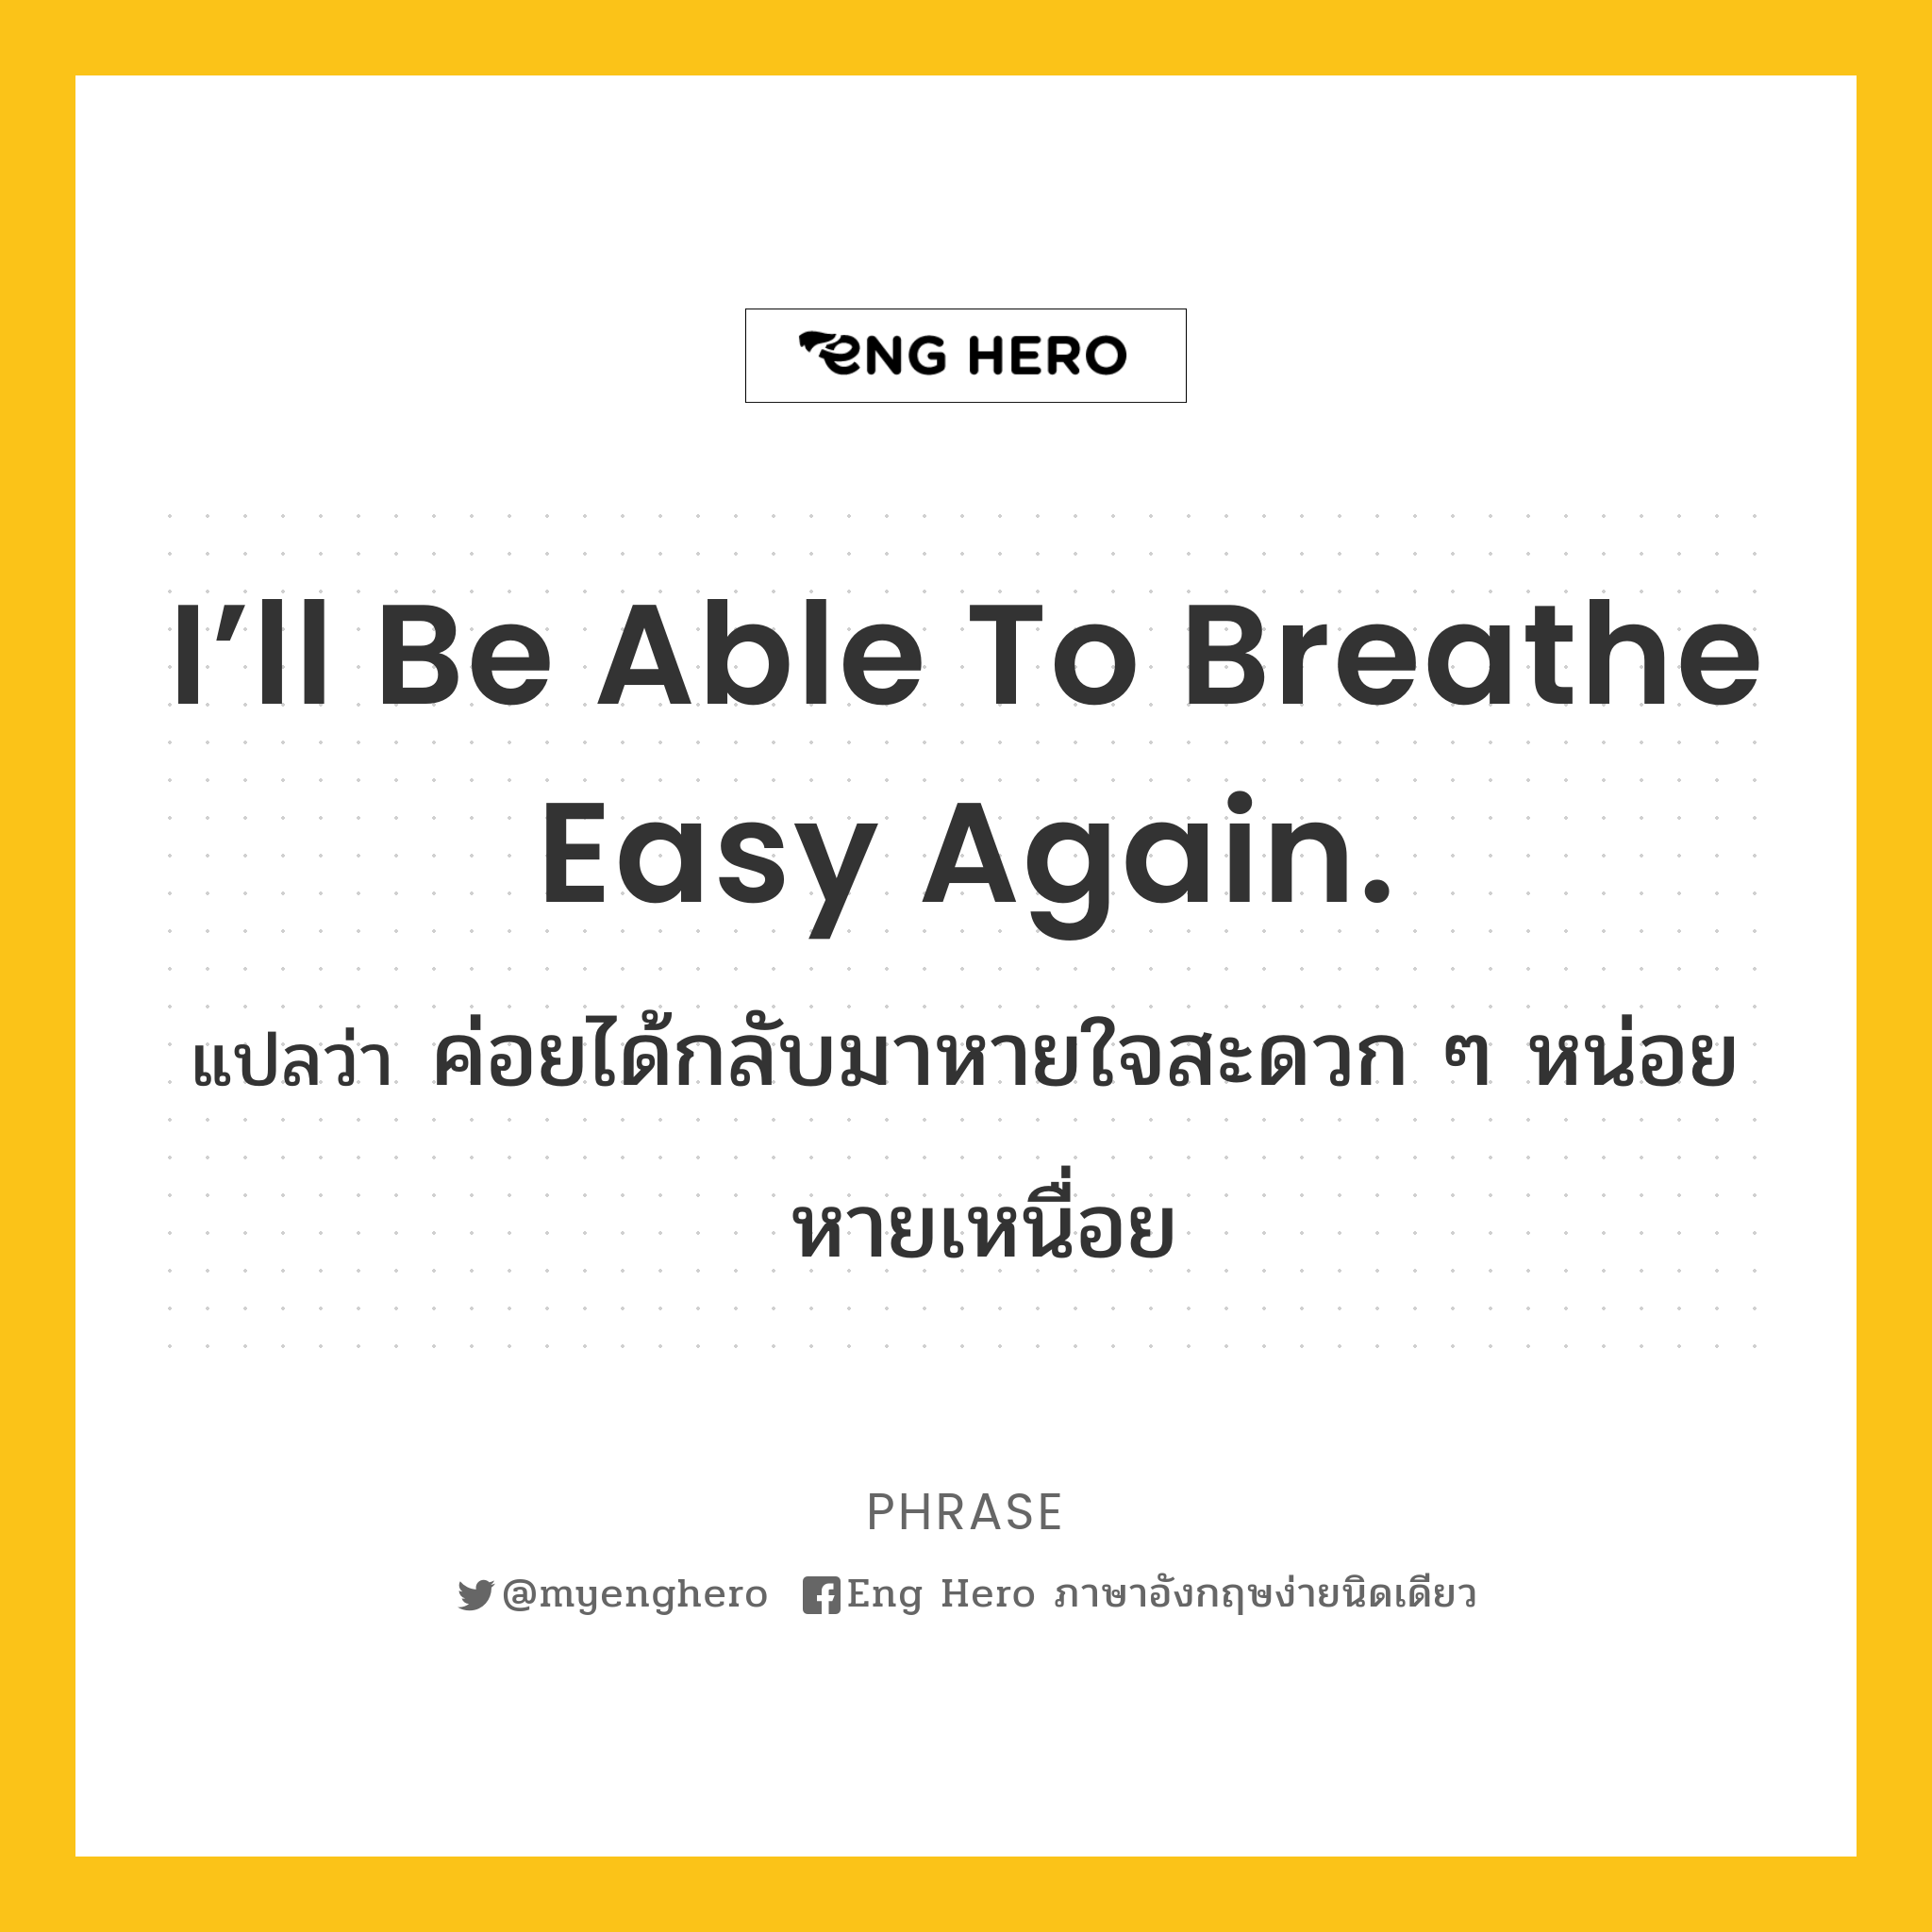 I’ll be able to breathe easy again.